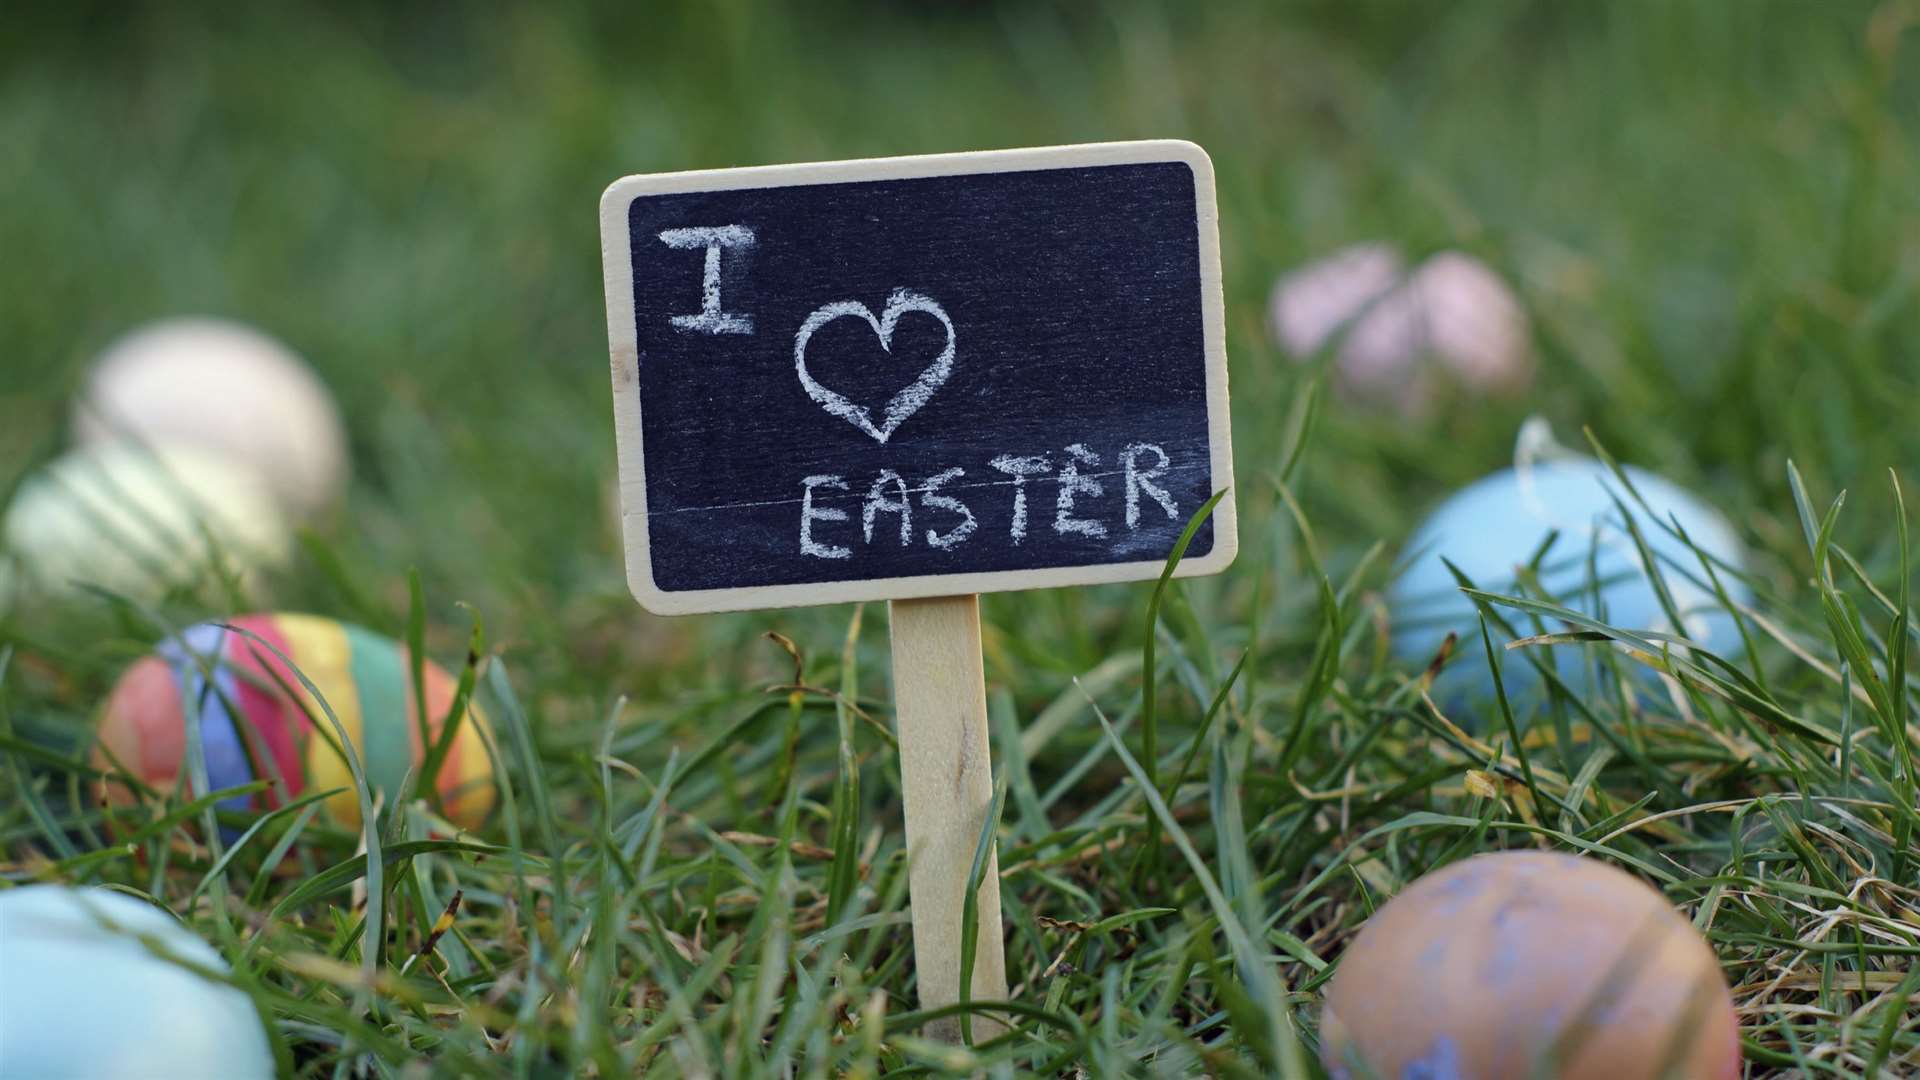 Hobbycraft's Easter activities are free or cost £1 to take part